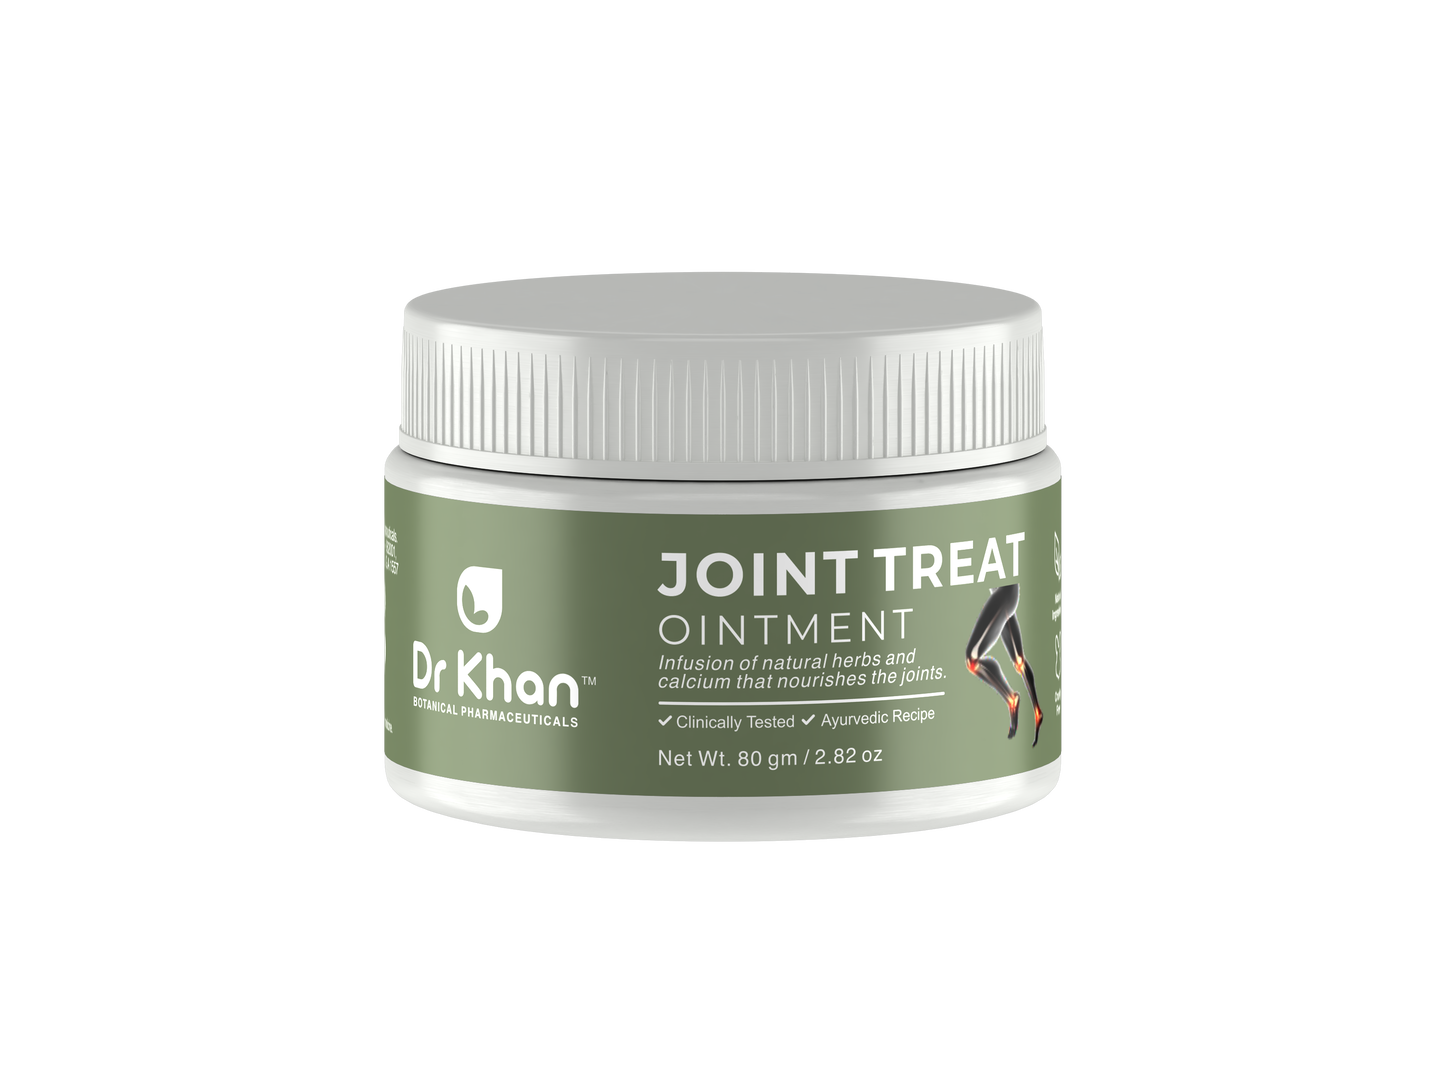 Joint Treat Ointment